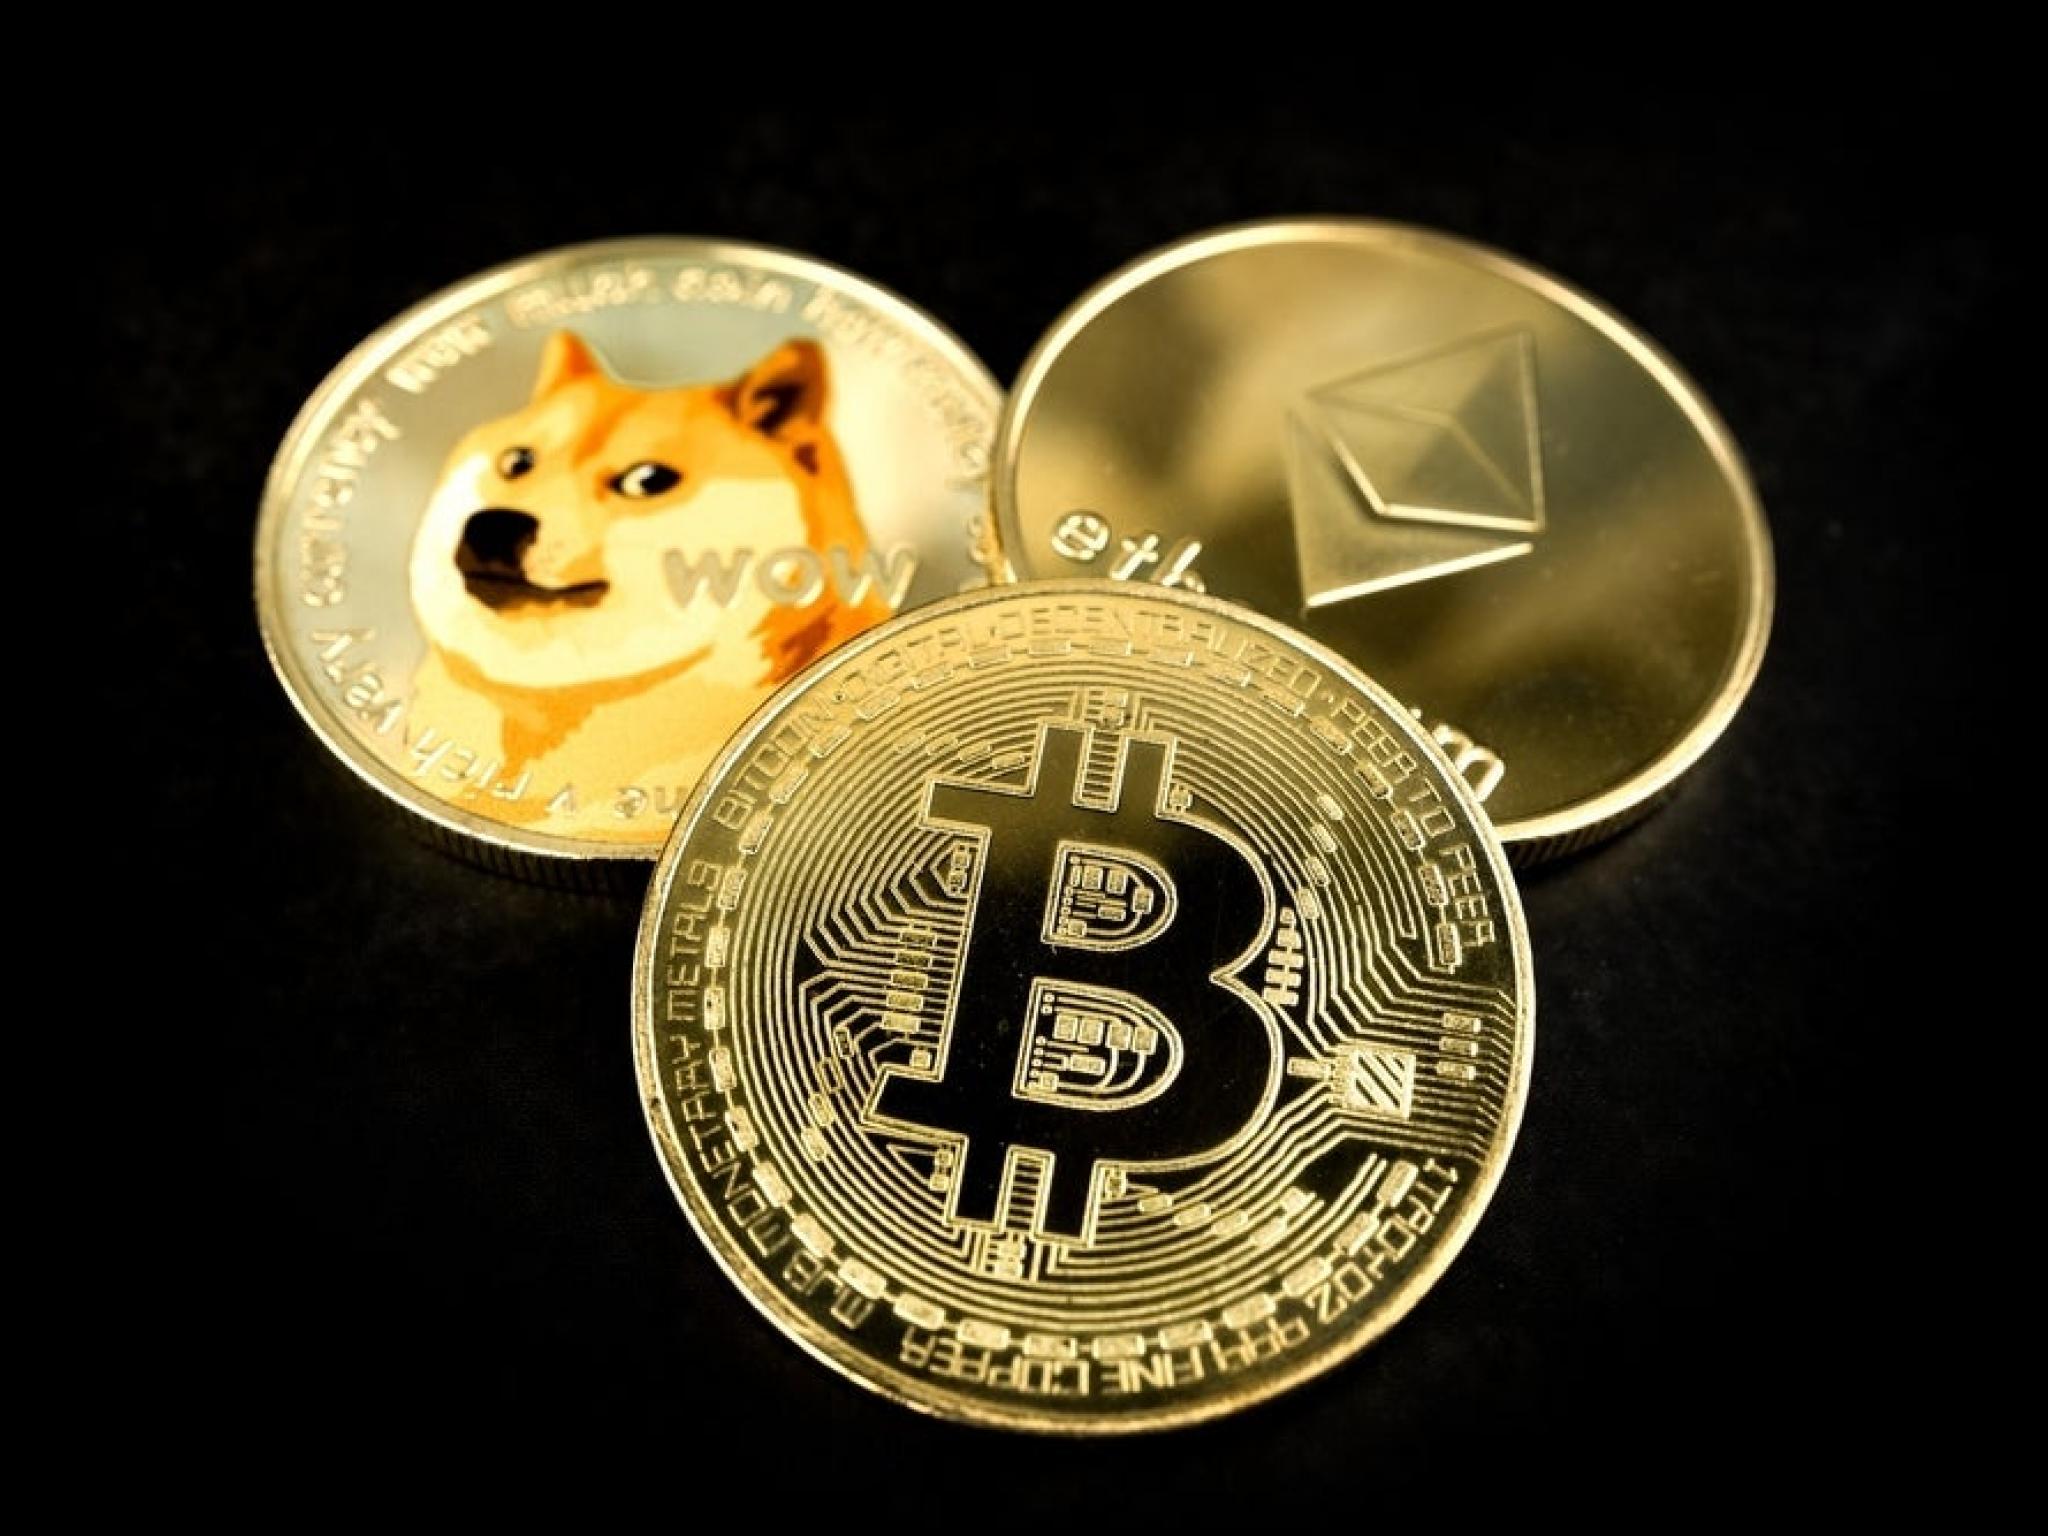  bitcoin-dogecoin-erase-earlier-gains-ethereum-holding-on-choppy-price-action-until-fomc-on-wednesday-predicts-trader 